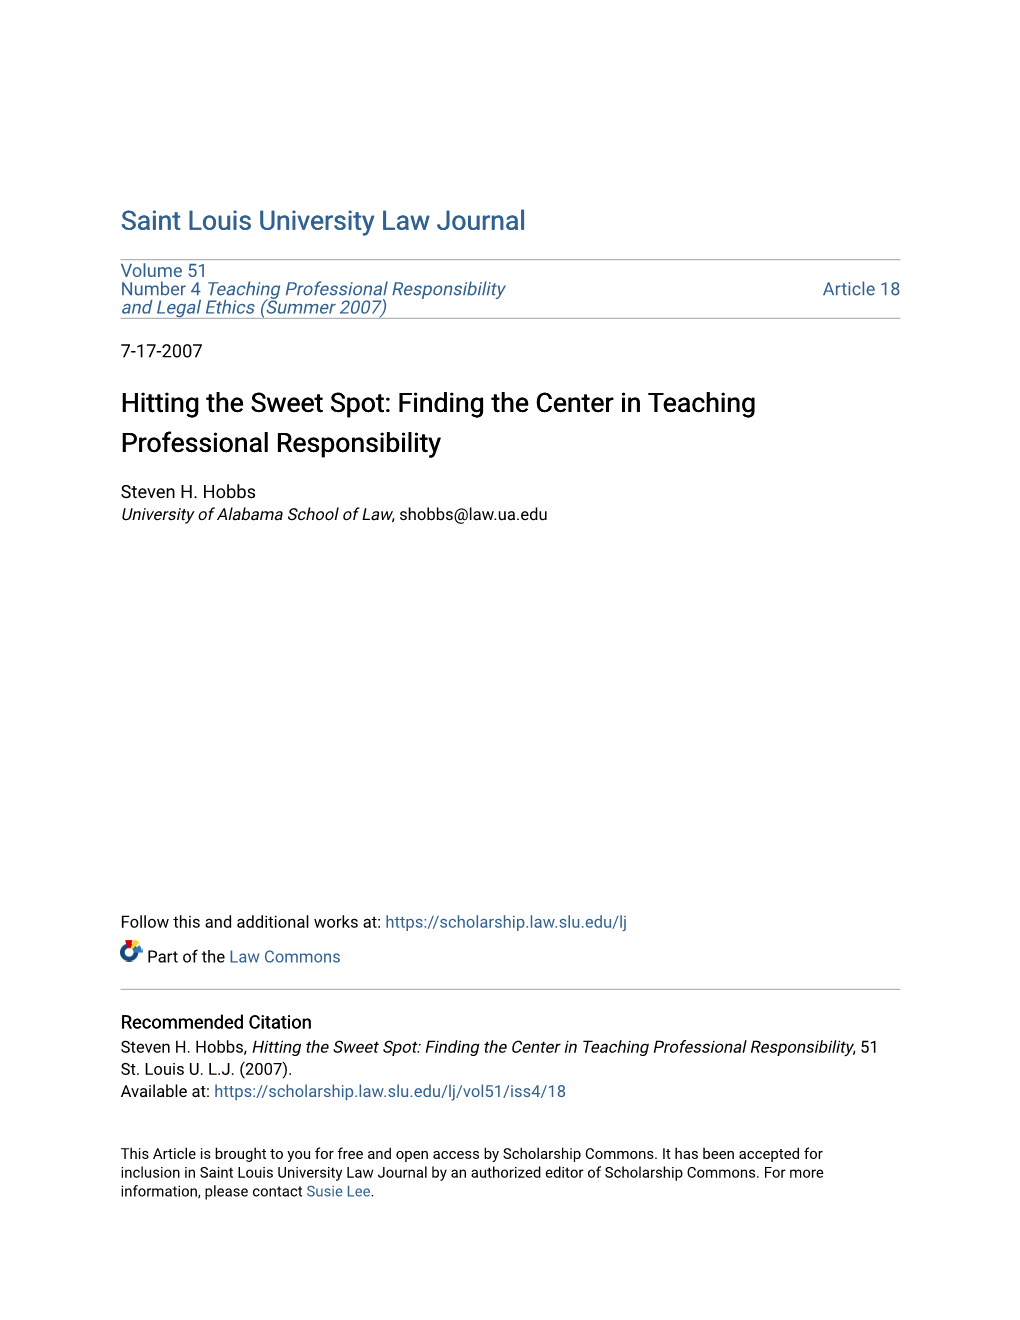 Hitting the Sweet Spot: Finding the Center in Teaching Professional Responsibility